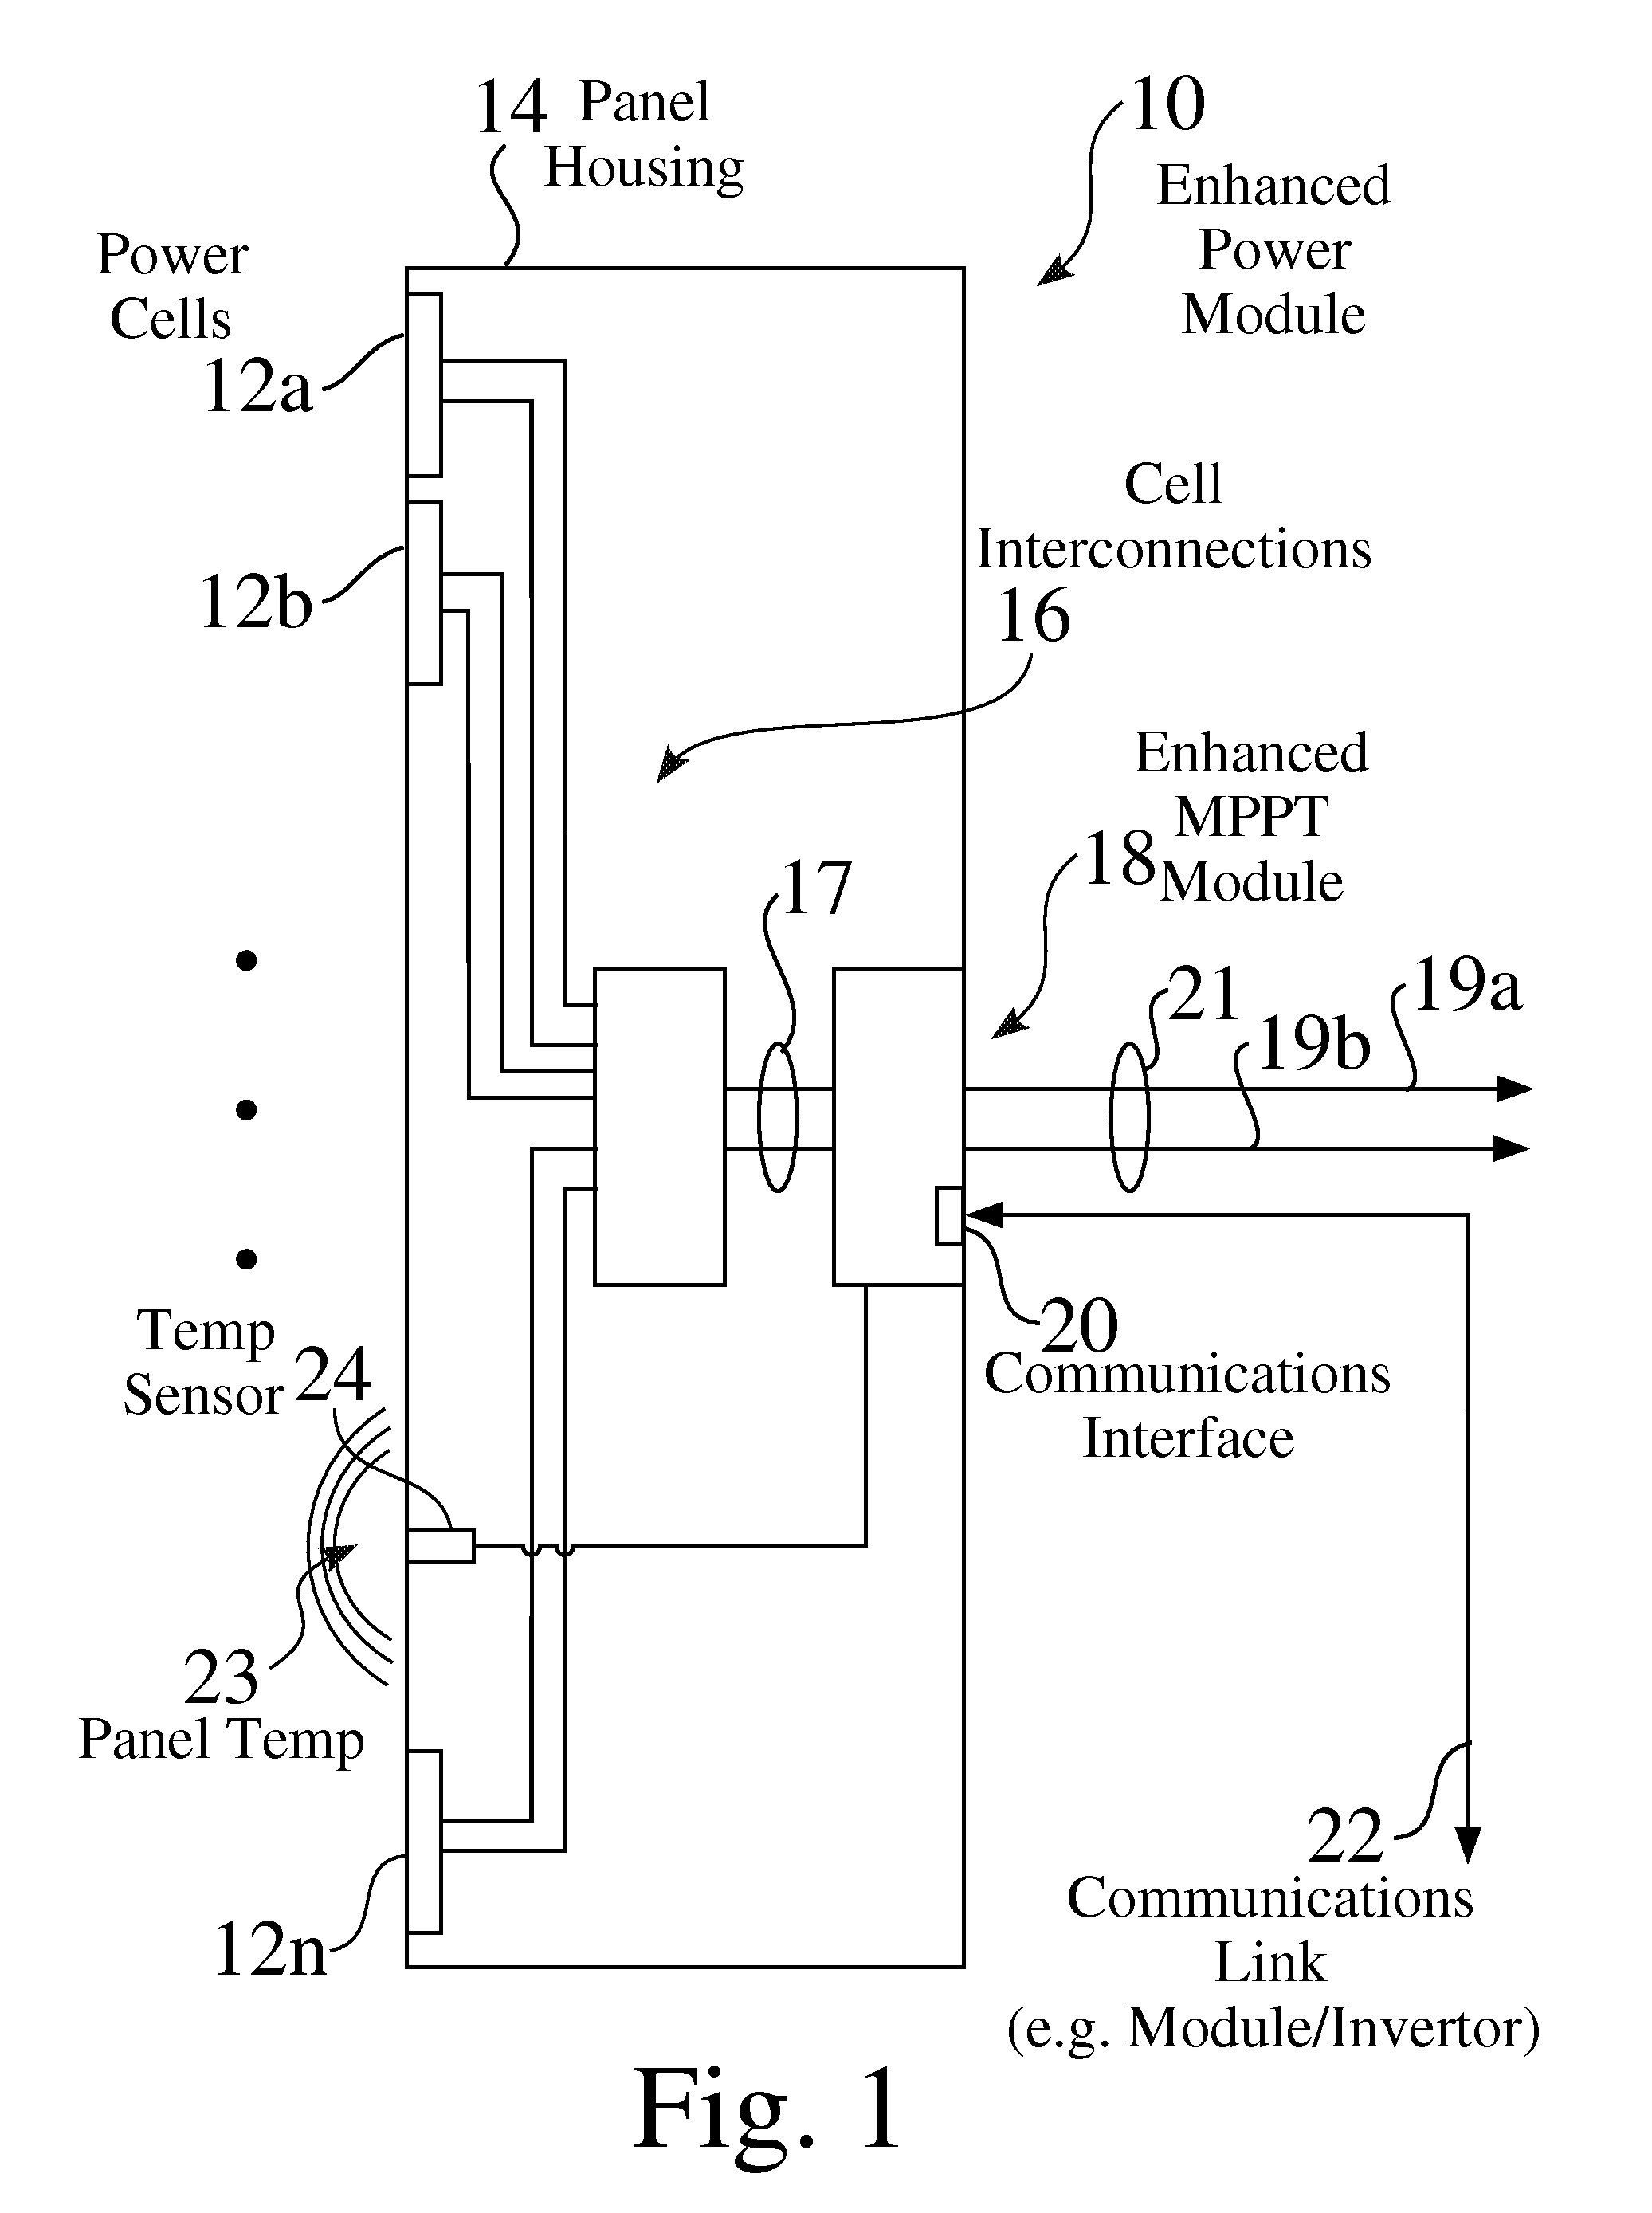 Pole-mounted power generation systems, structures and processes